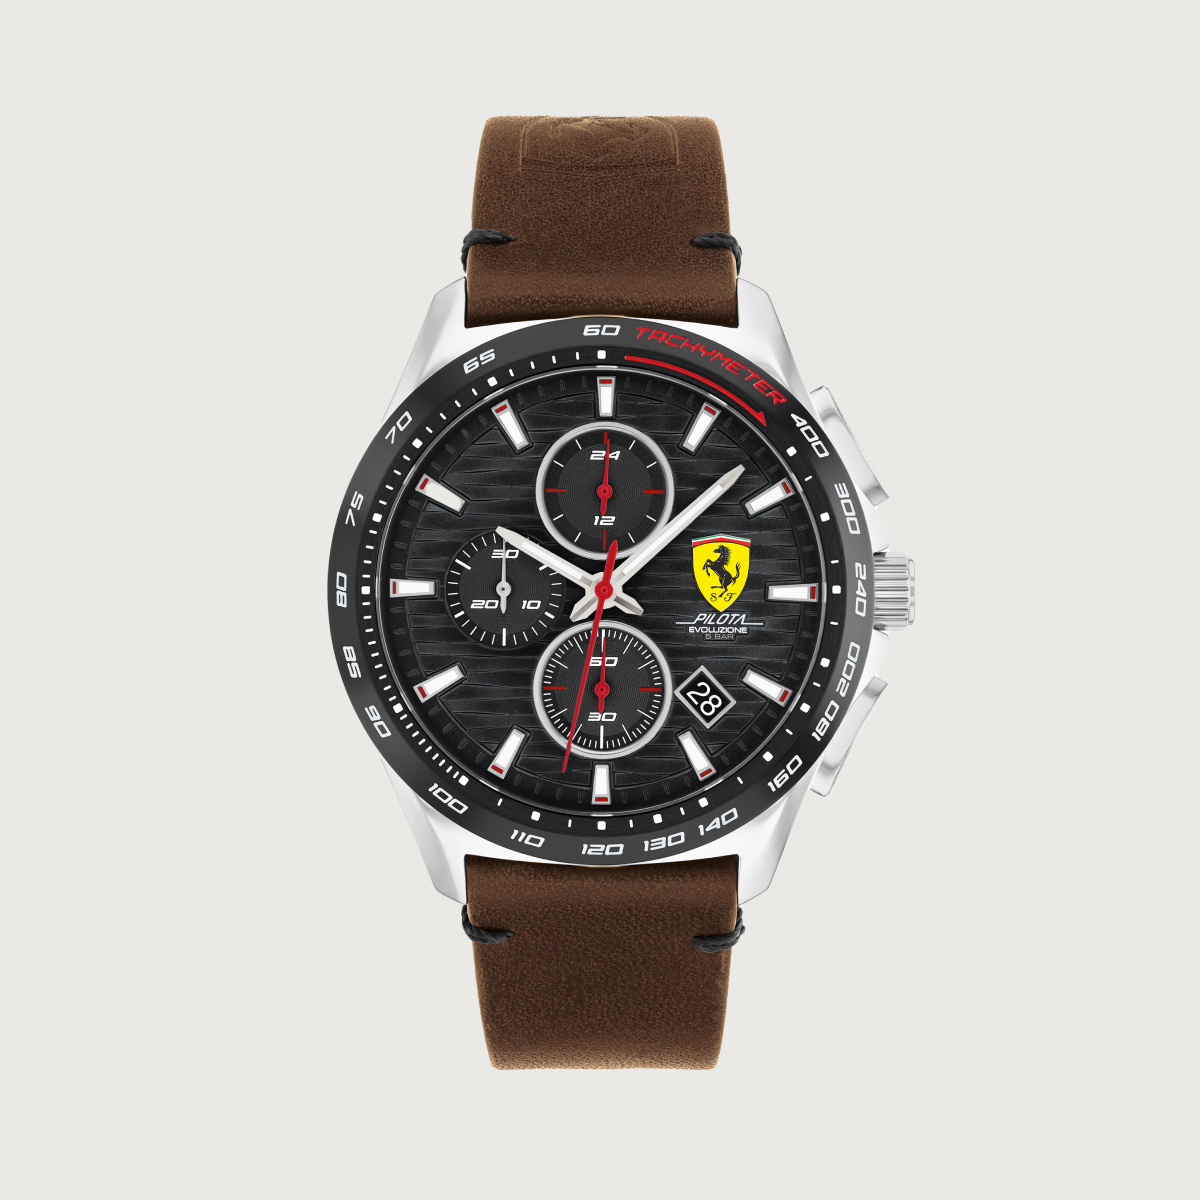 Pilota Evo cronograph watch with metal dial and leather strap